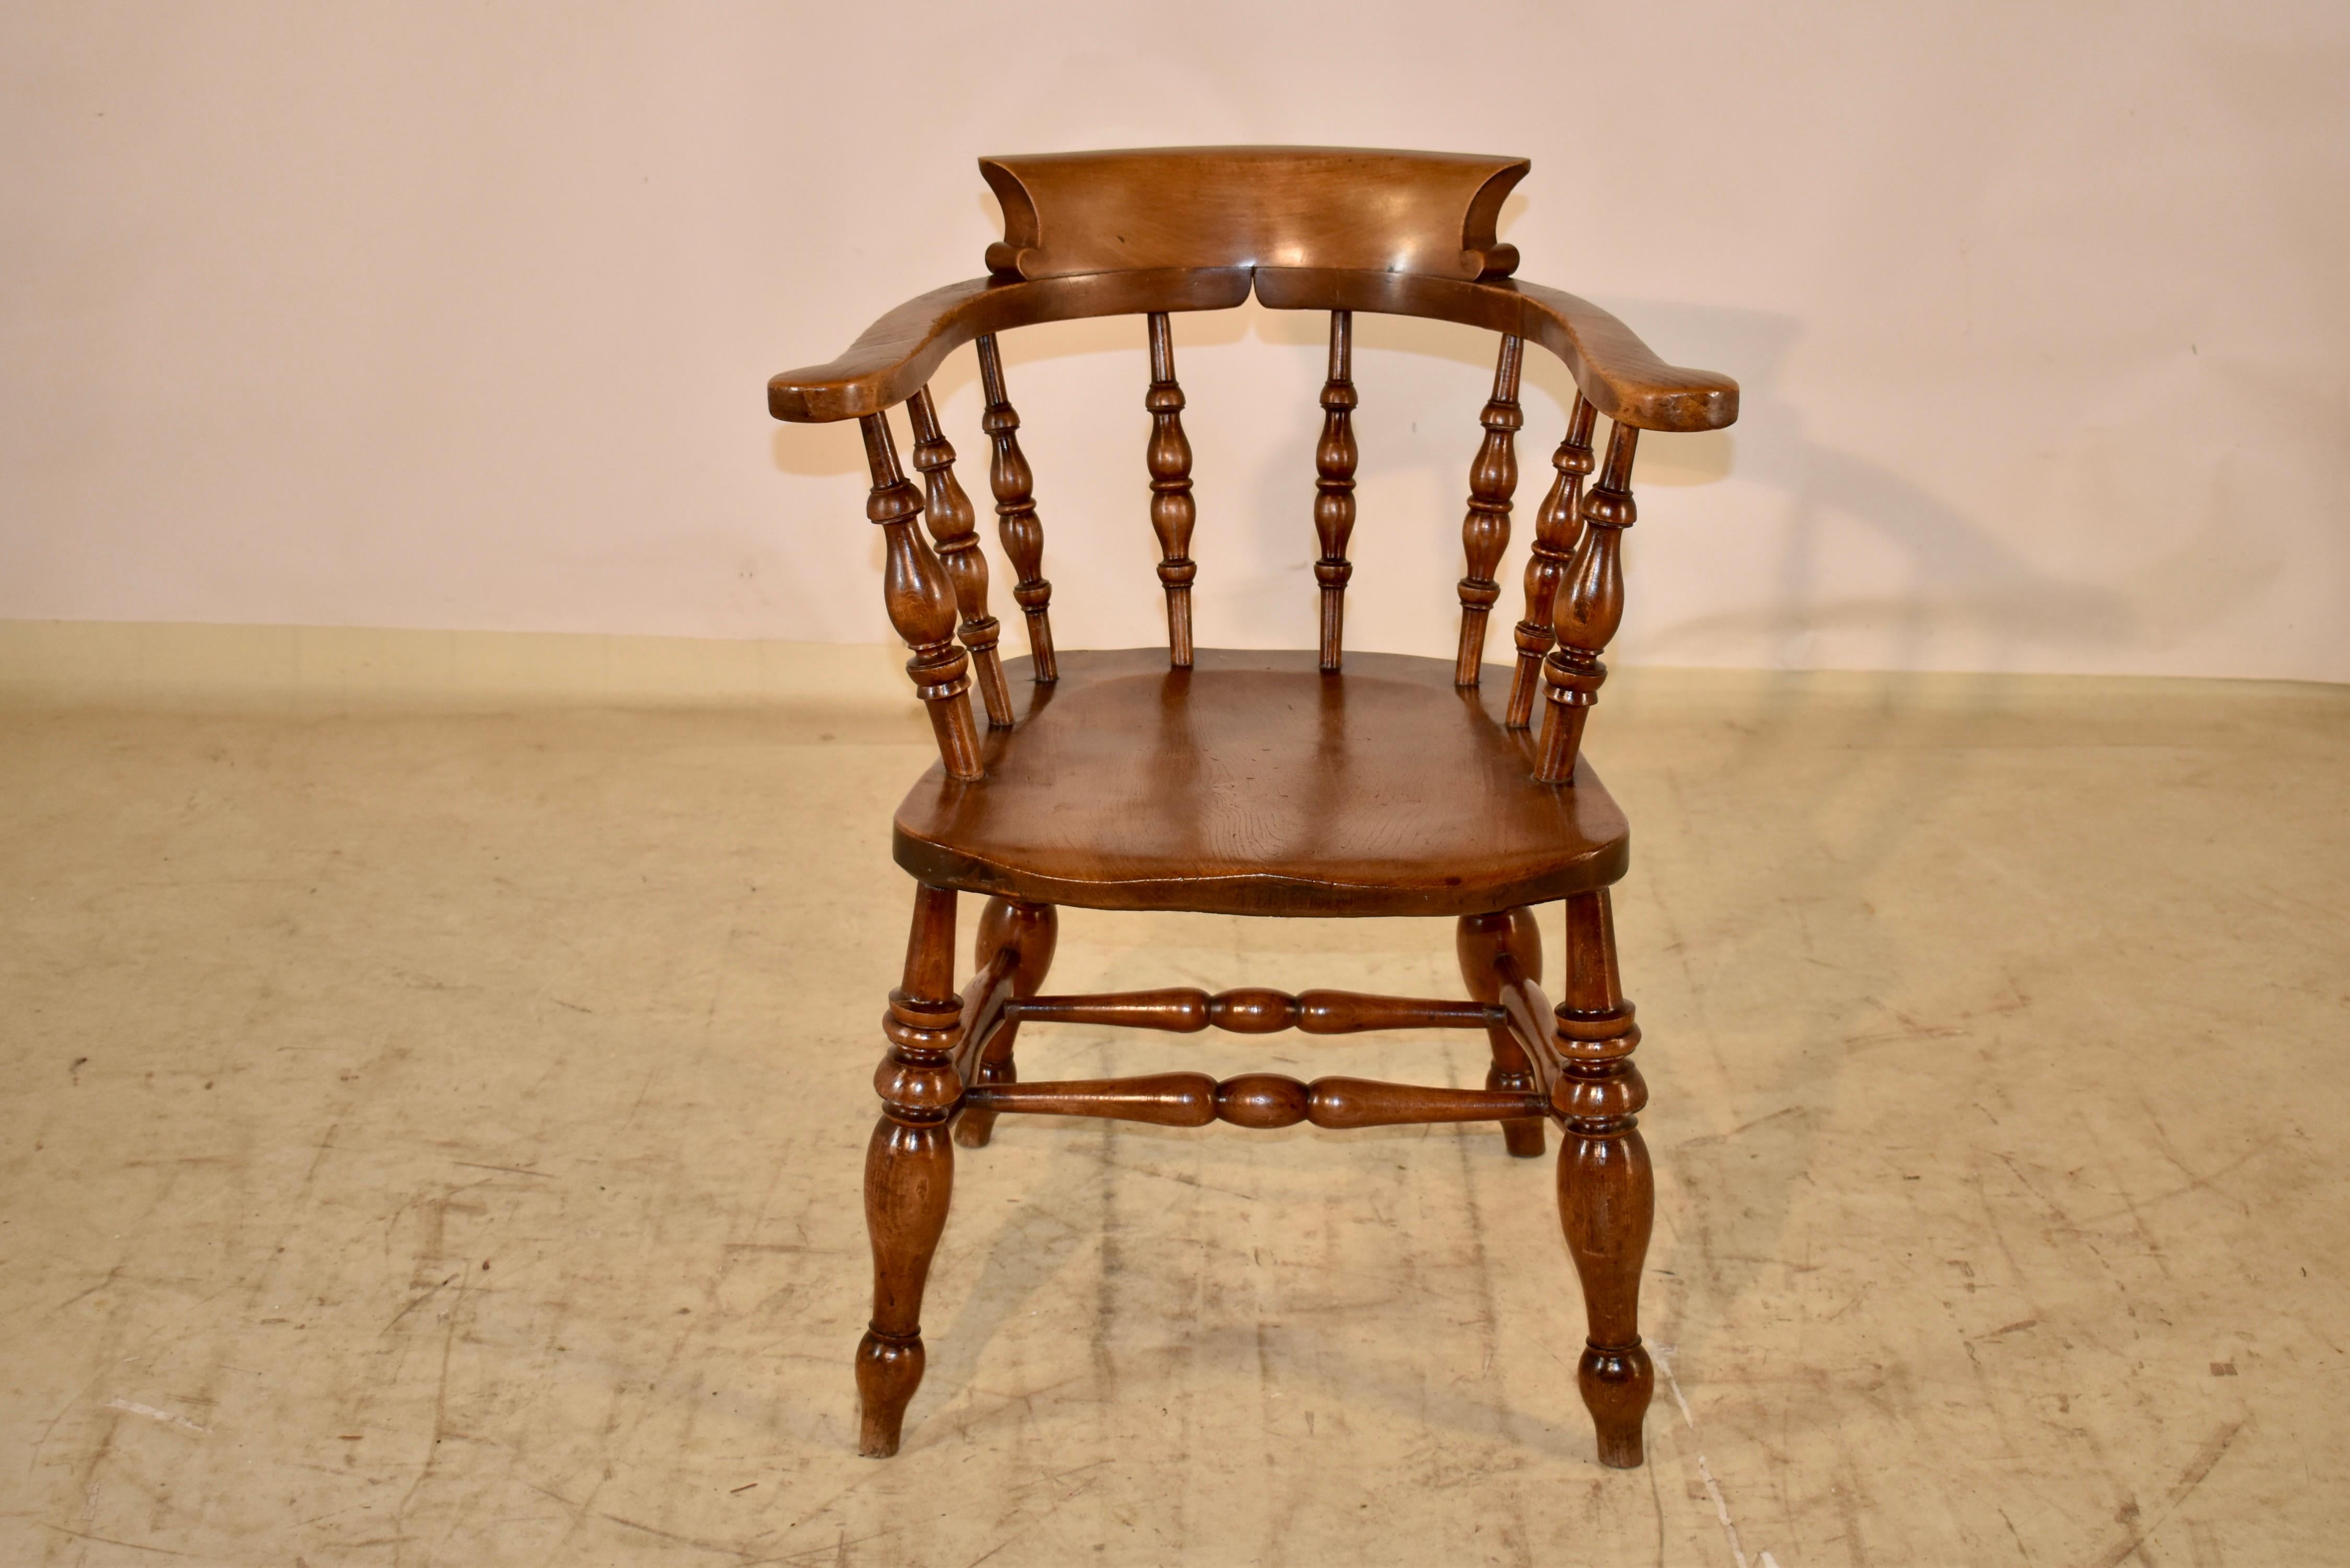 19th century captain's chair from England.  The chair is made from oak and has a seat made from ash.  This type of chair was made for sitting for long periods of time and is very comfortable.  The seat height is 18 inches and the arm height is 29.5